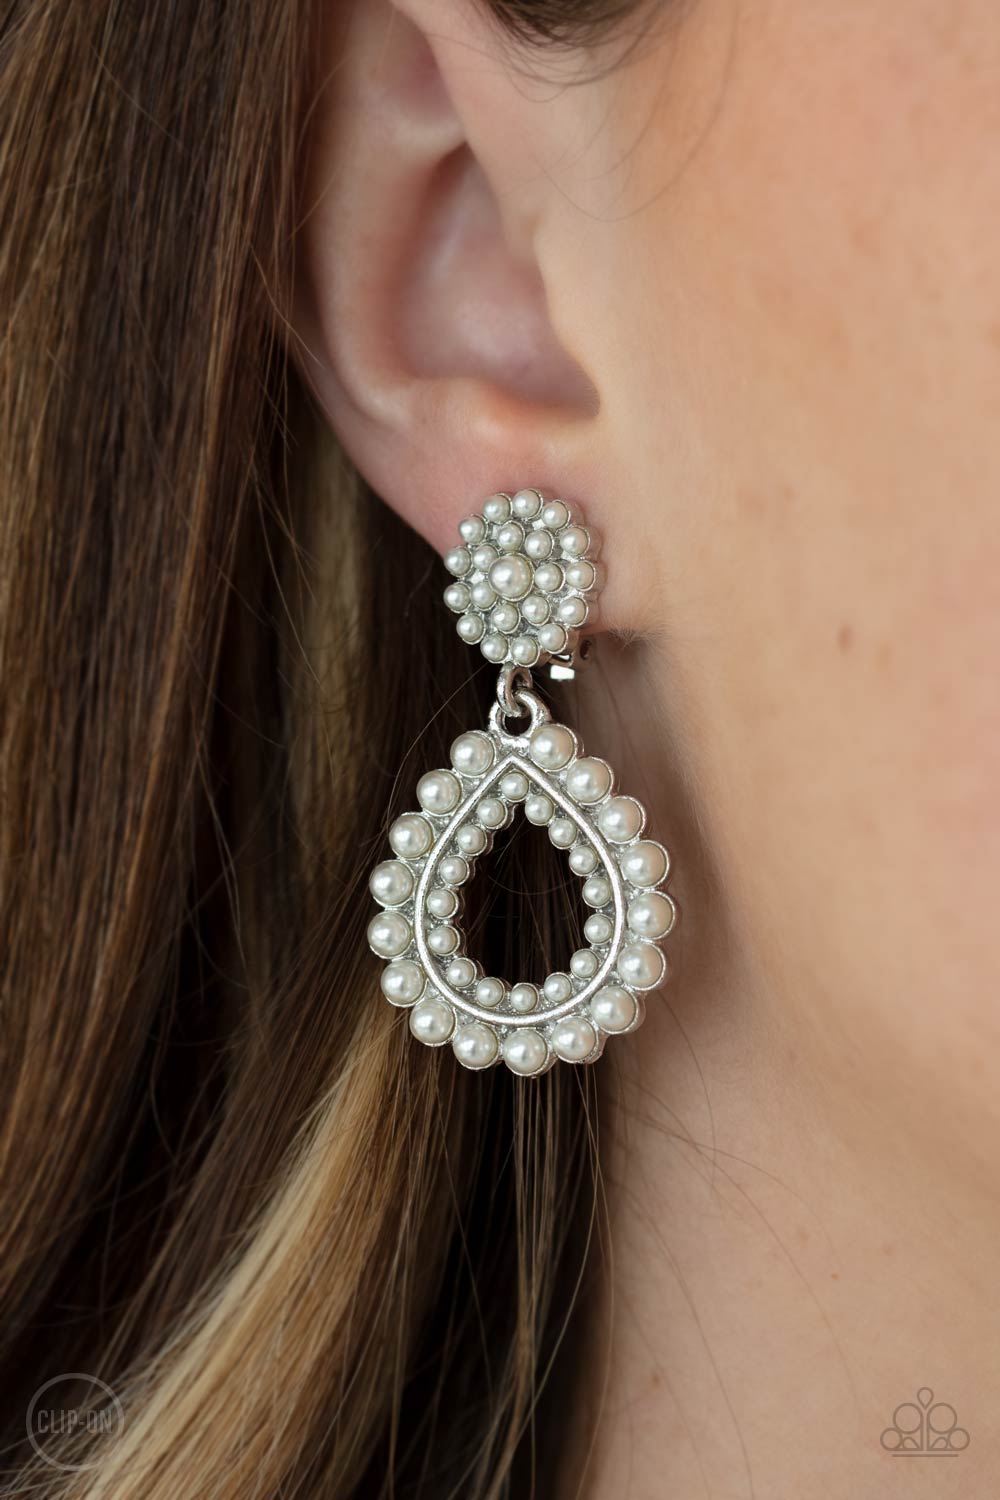 Discerning Droplets - White Pearl Earrings